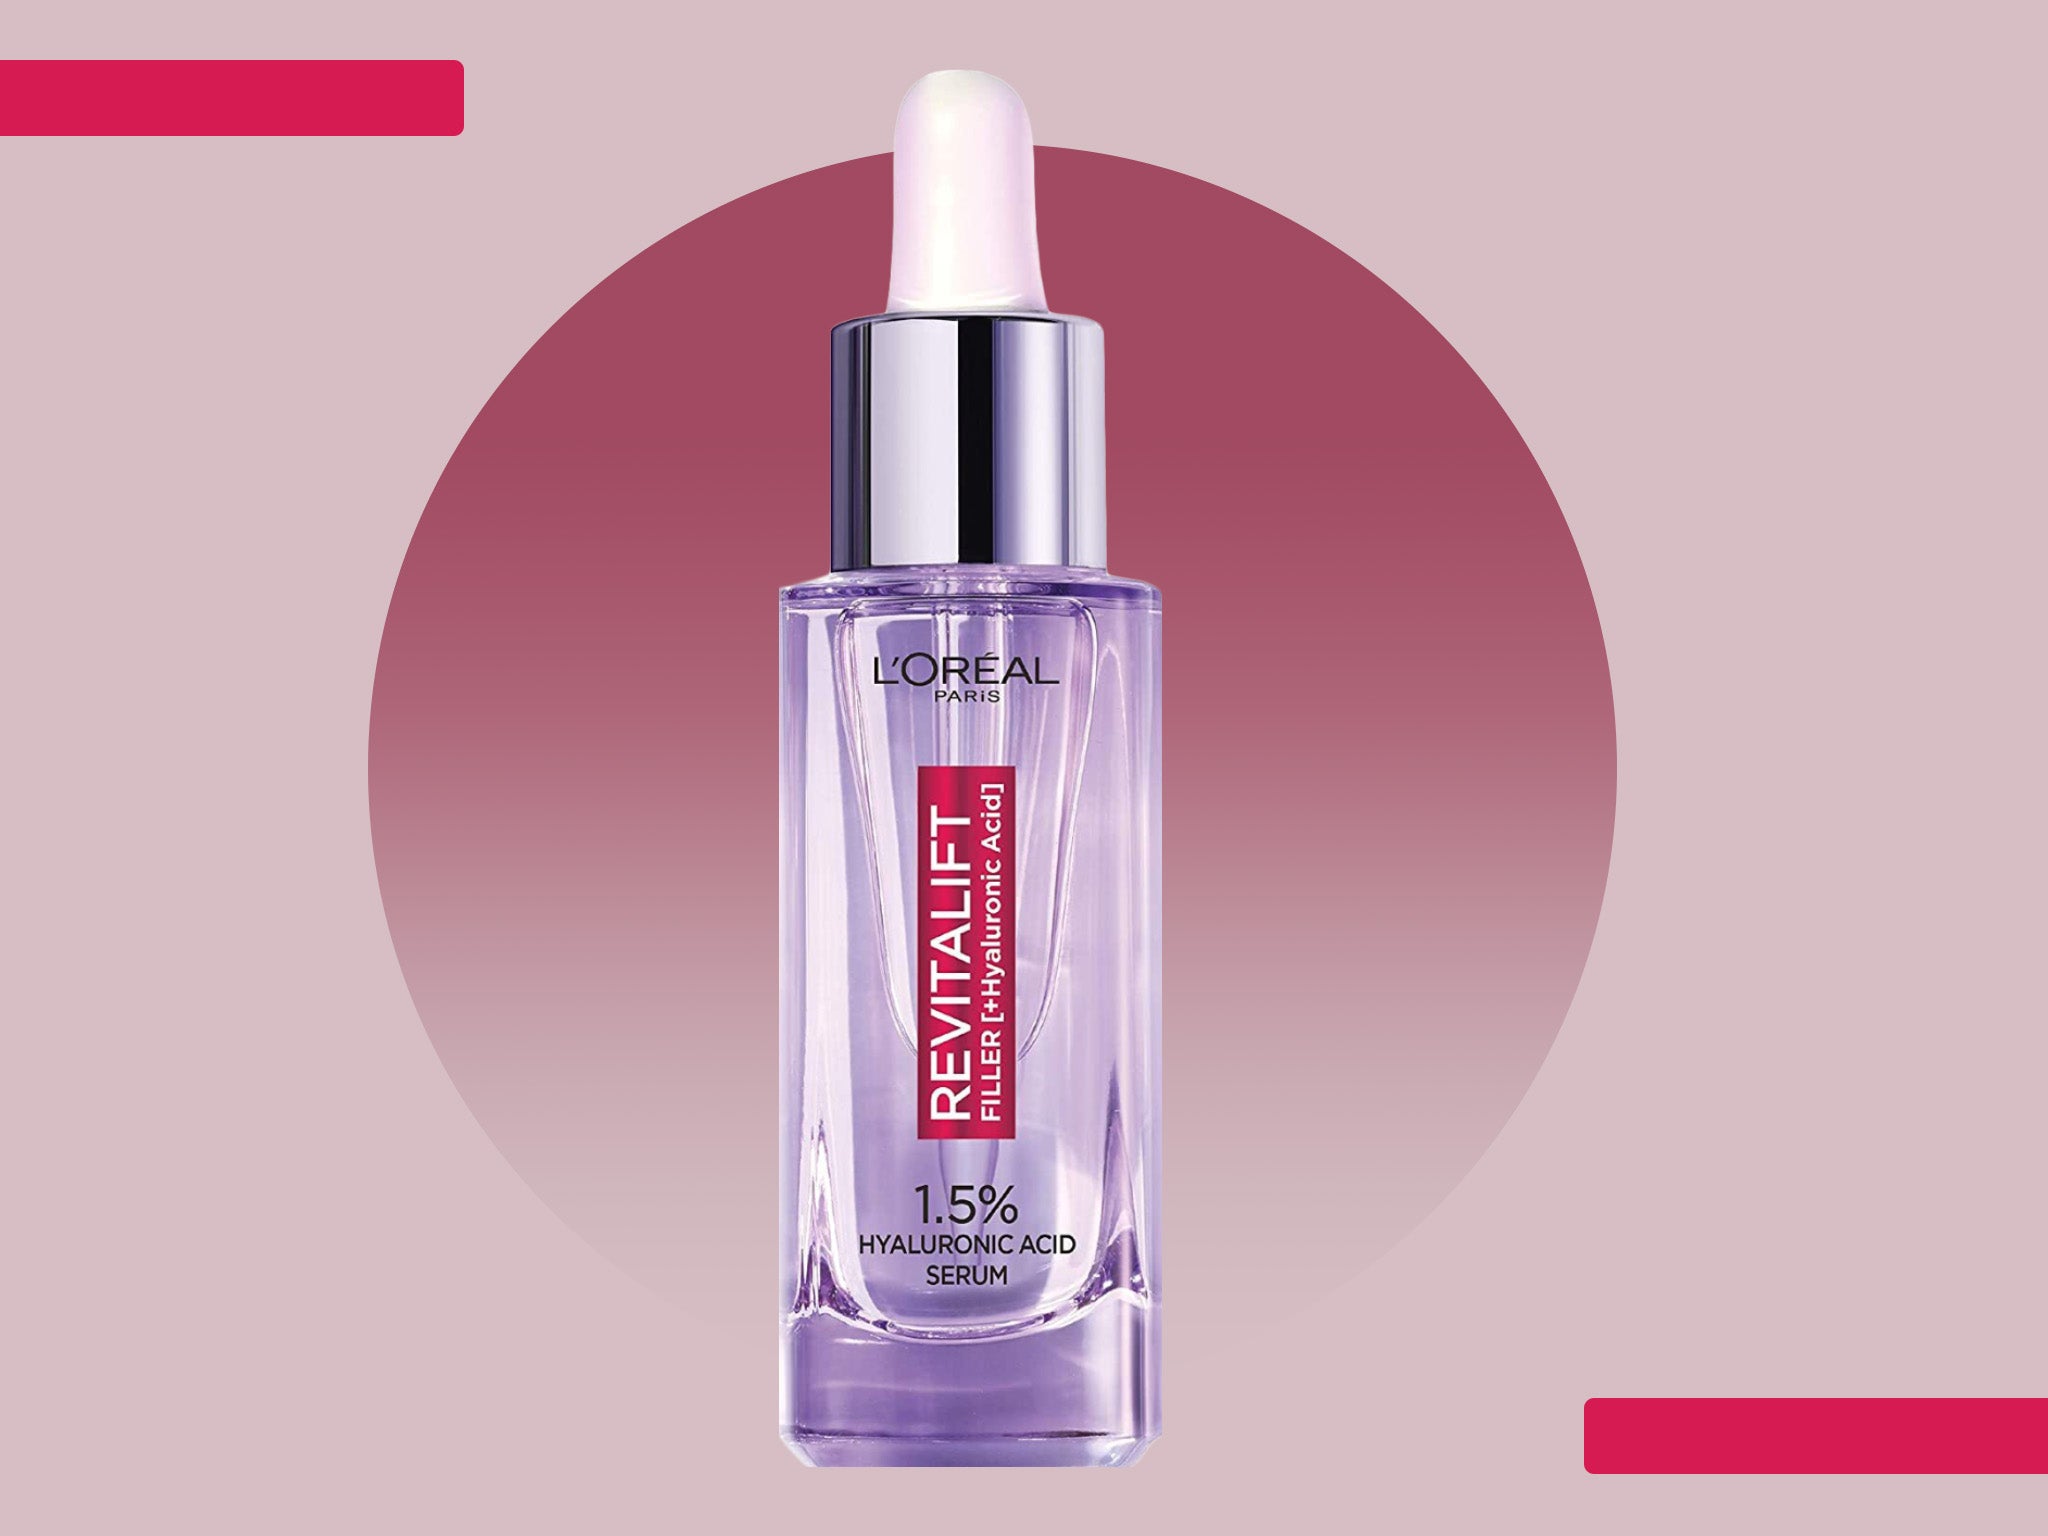 The revitalift filler is packed with skin-plumping ingredients